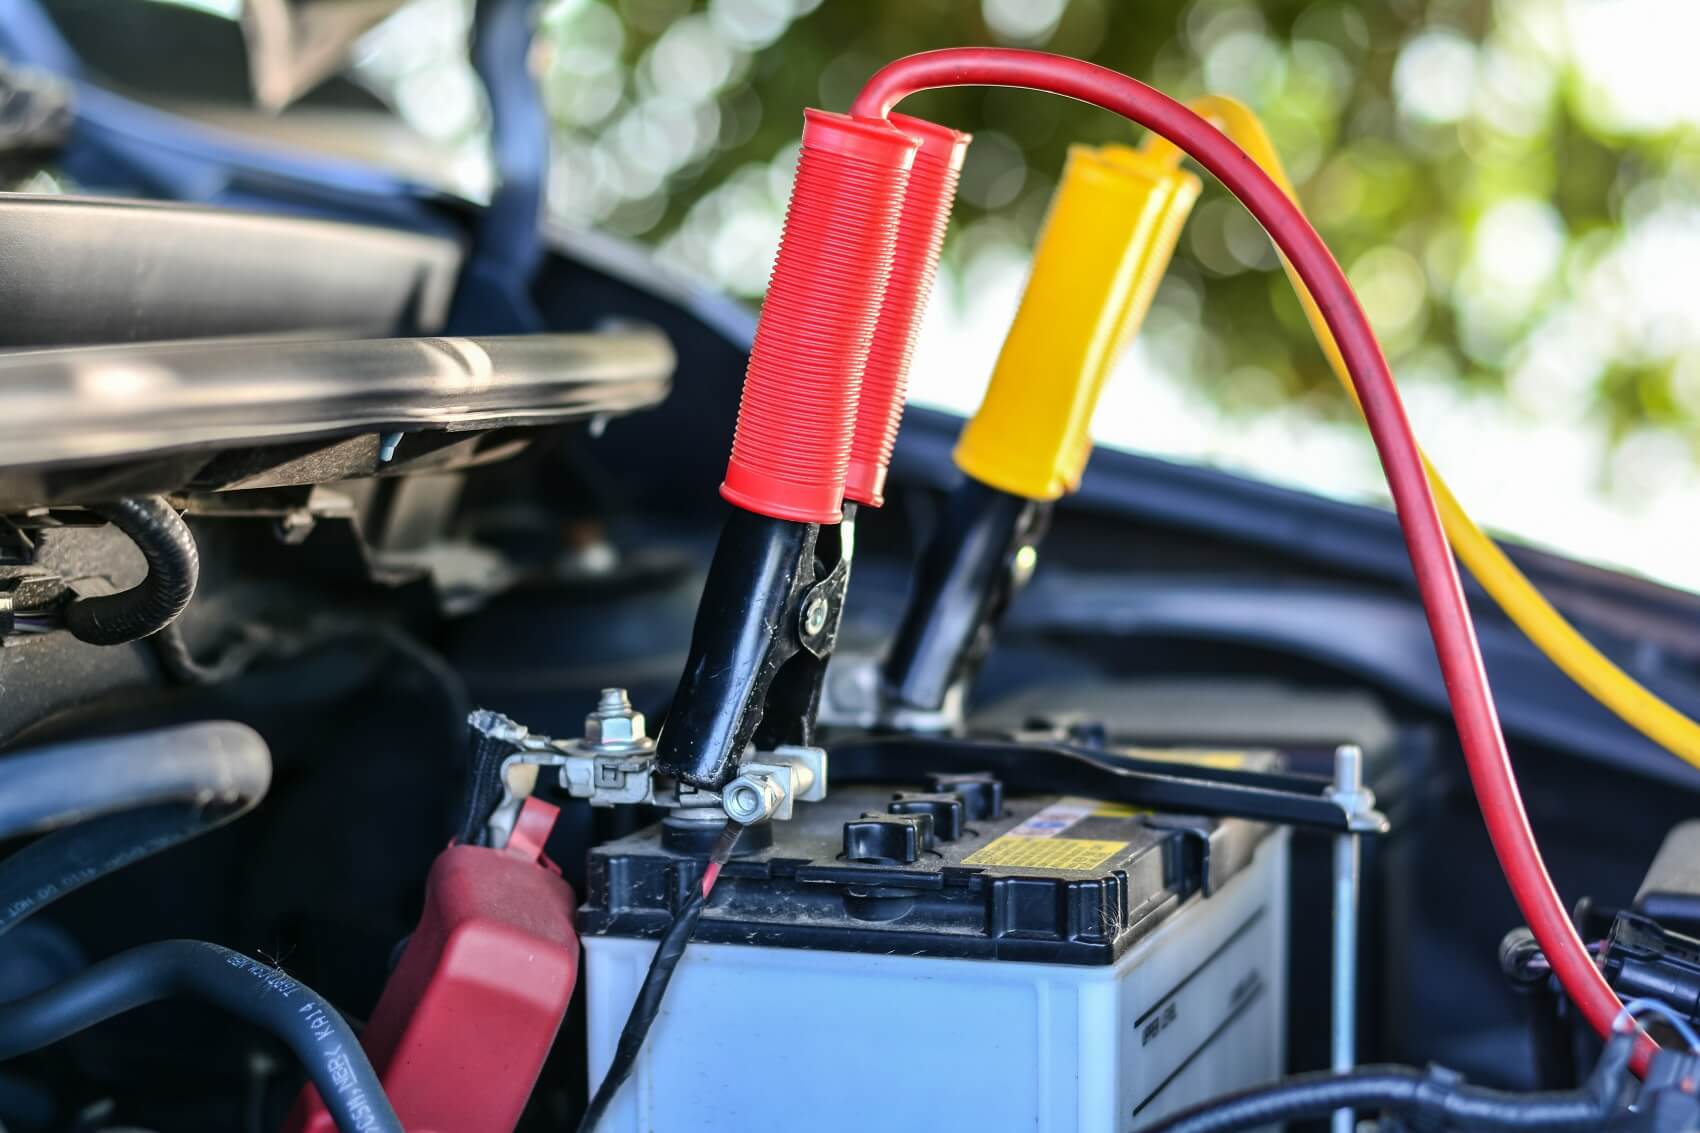 How to charge a car battery at home information